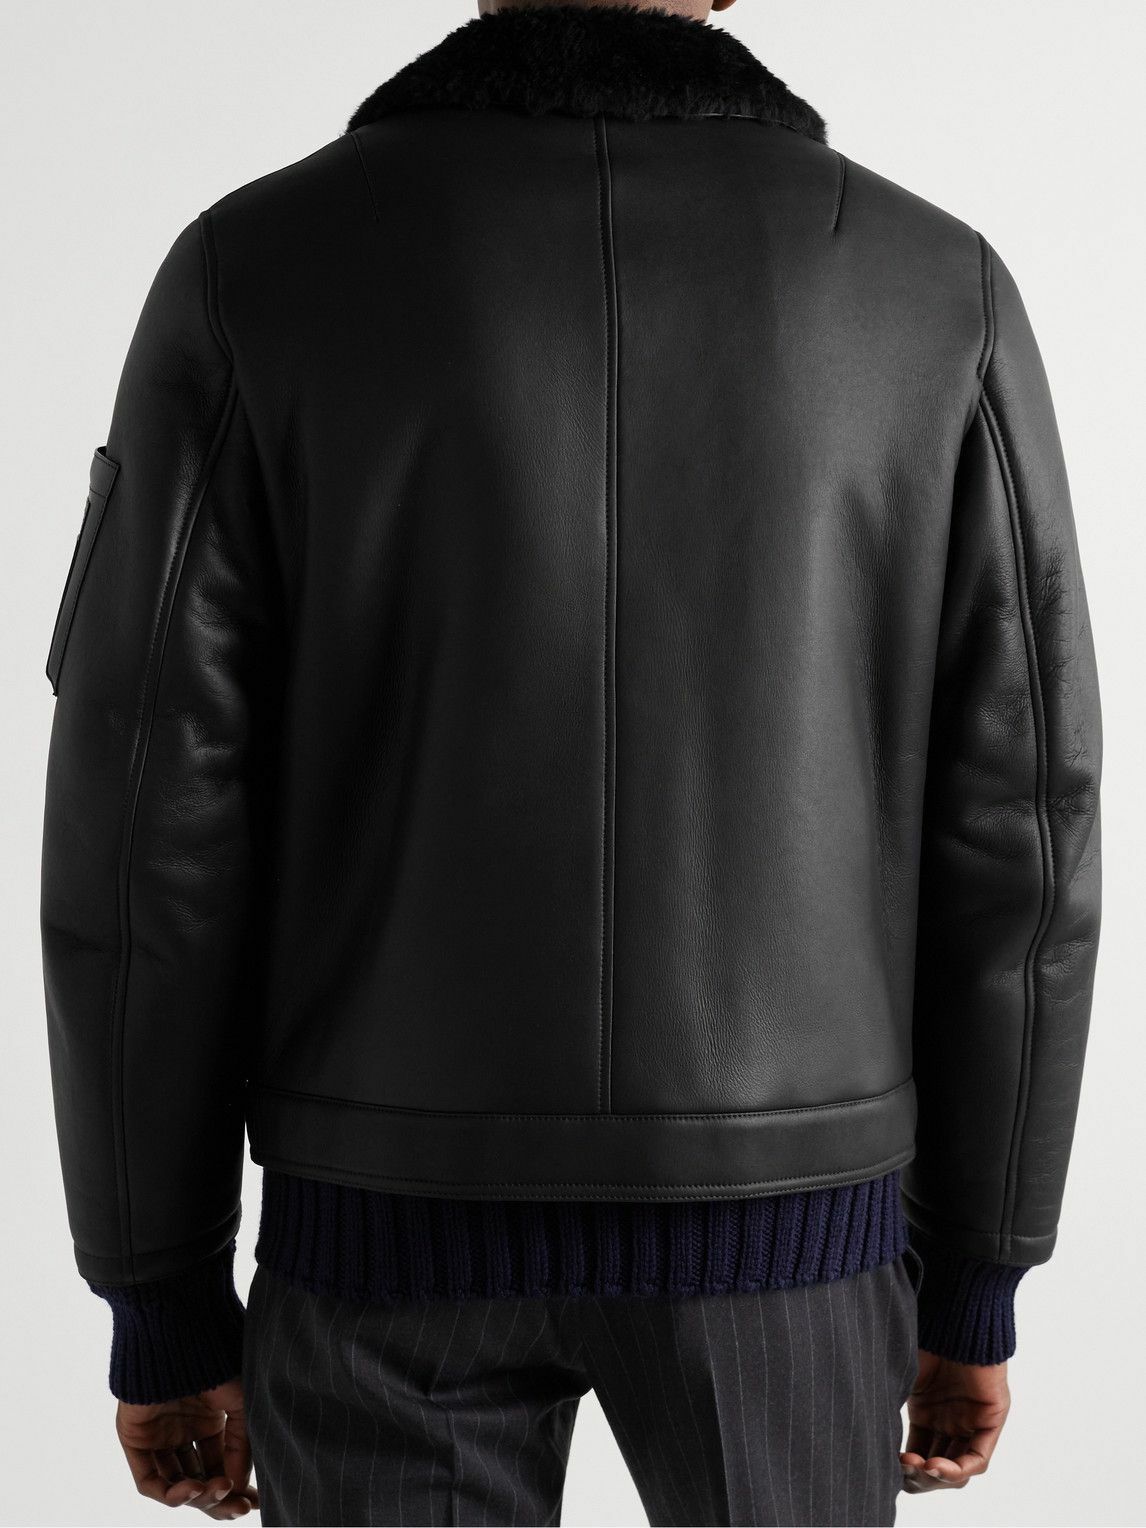 Dunhill - Shearling-Trimmed Leather Jacket - Black Dunhill